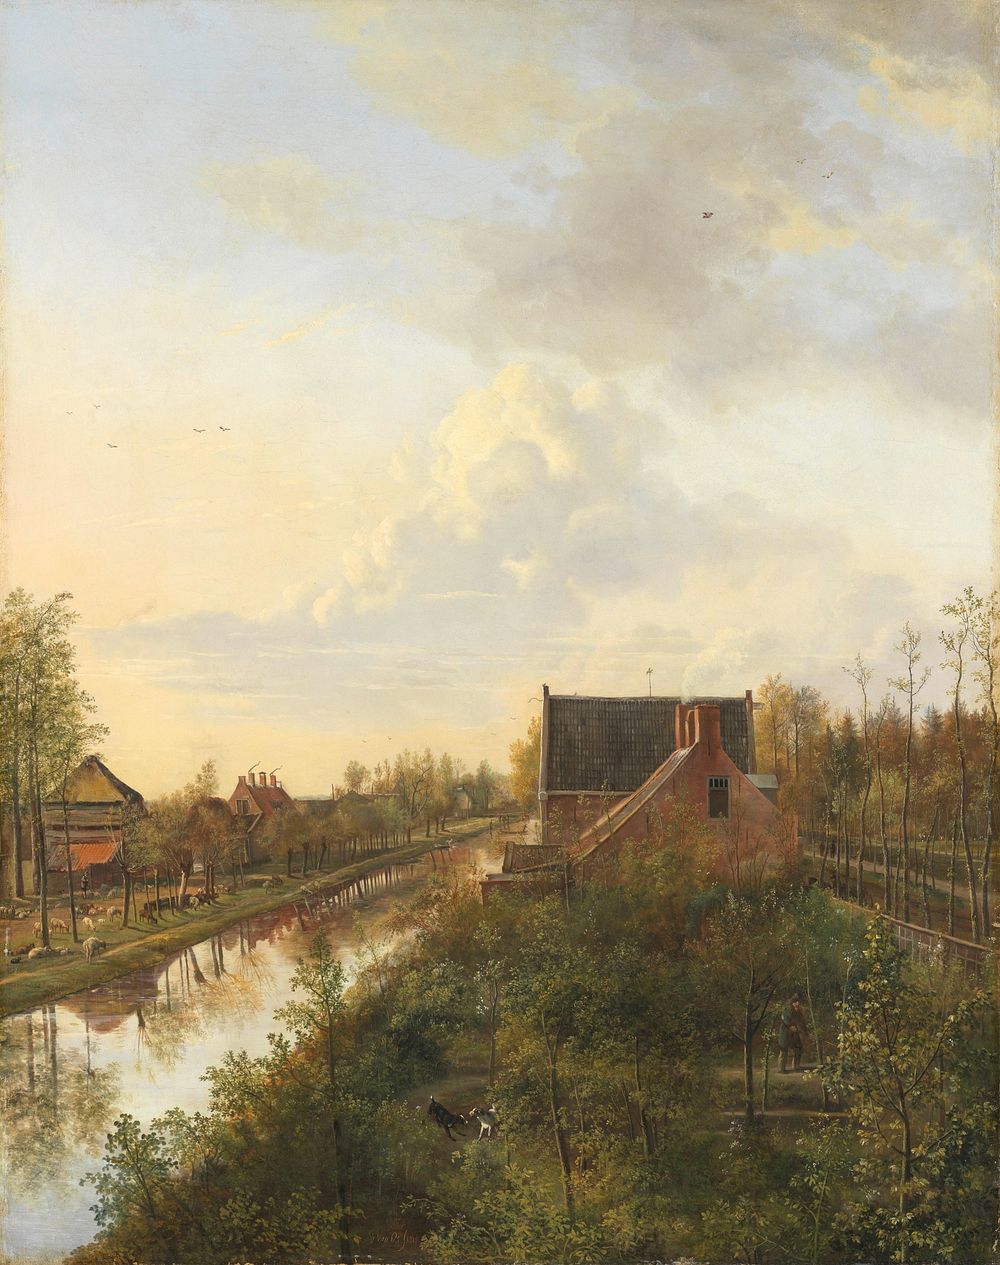 The Canal at ’s-Graveland (1818) by Pieter Gerardus van Os